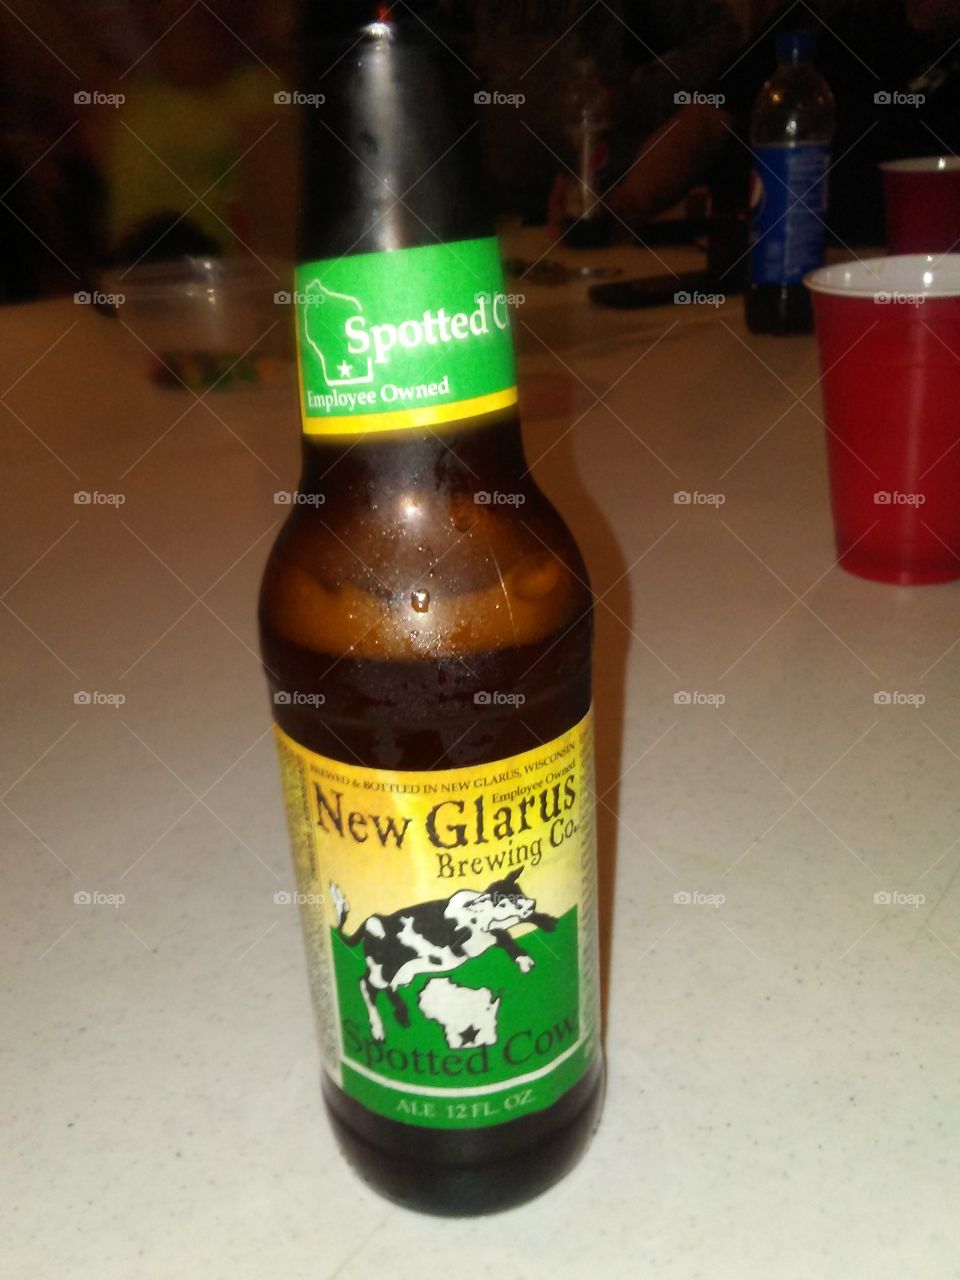 Drinking a Spotted Cow, a Farmhouse Ale made by the New Glarus Brewing Company Southwest of Madison, Wisconsin.  Their beers and ales are only distributed and sold in Wisconsin.